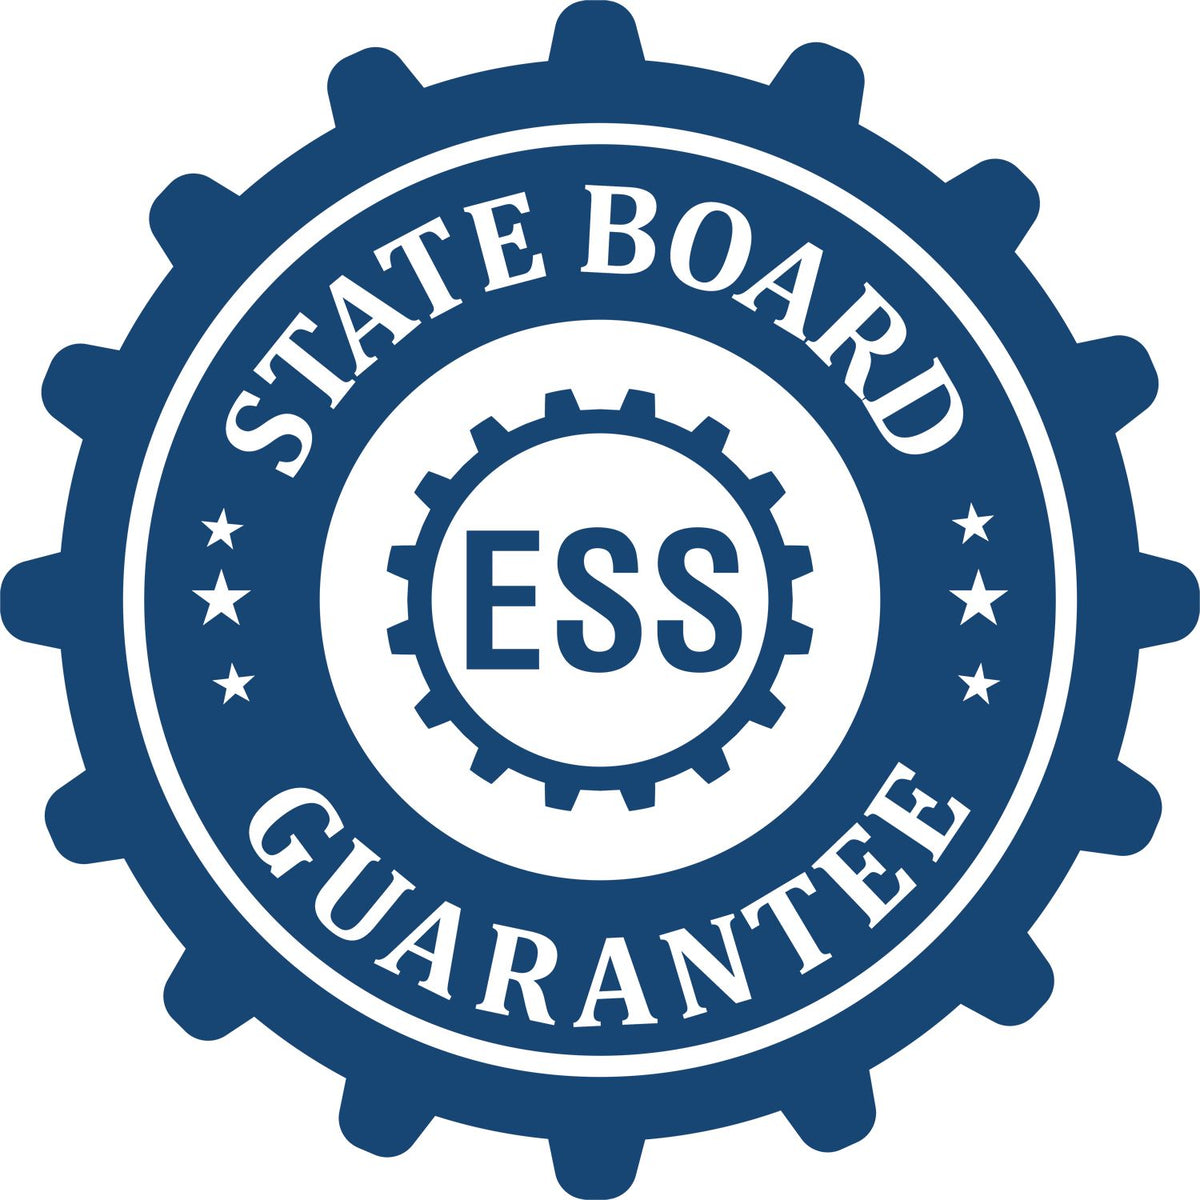 An emblem in a gear shape illustrating a state board guarantee for the West Virginia Engineer Desk Seal product.